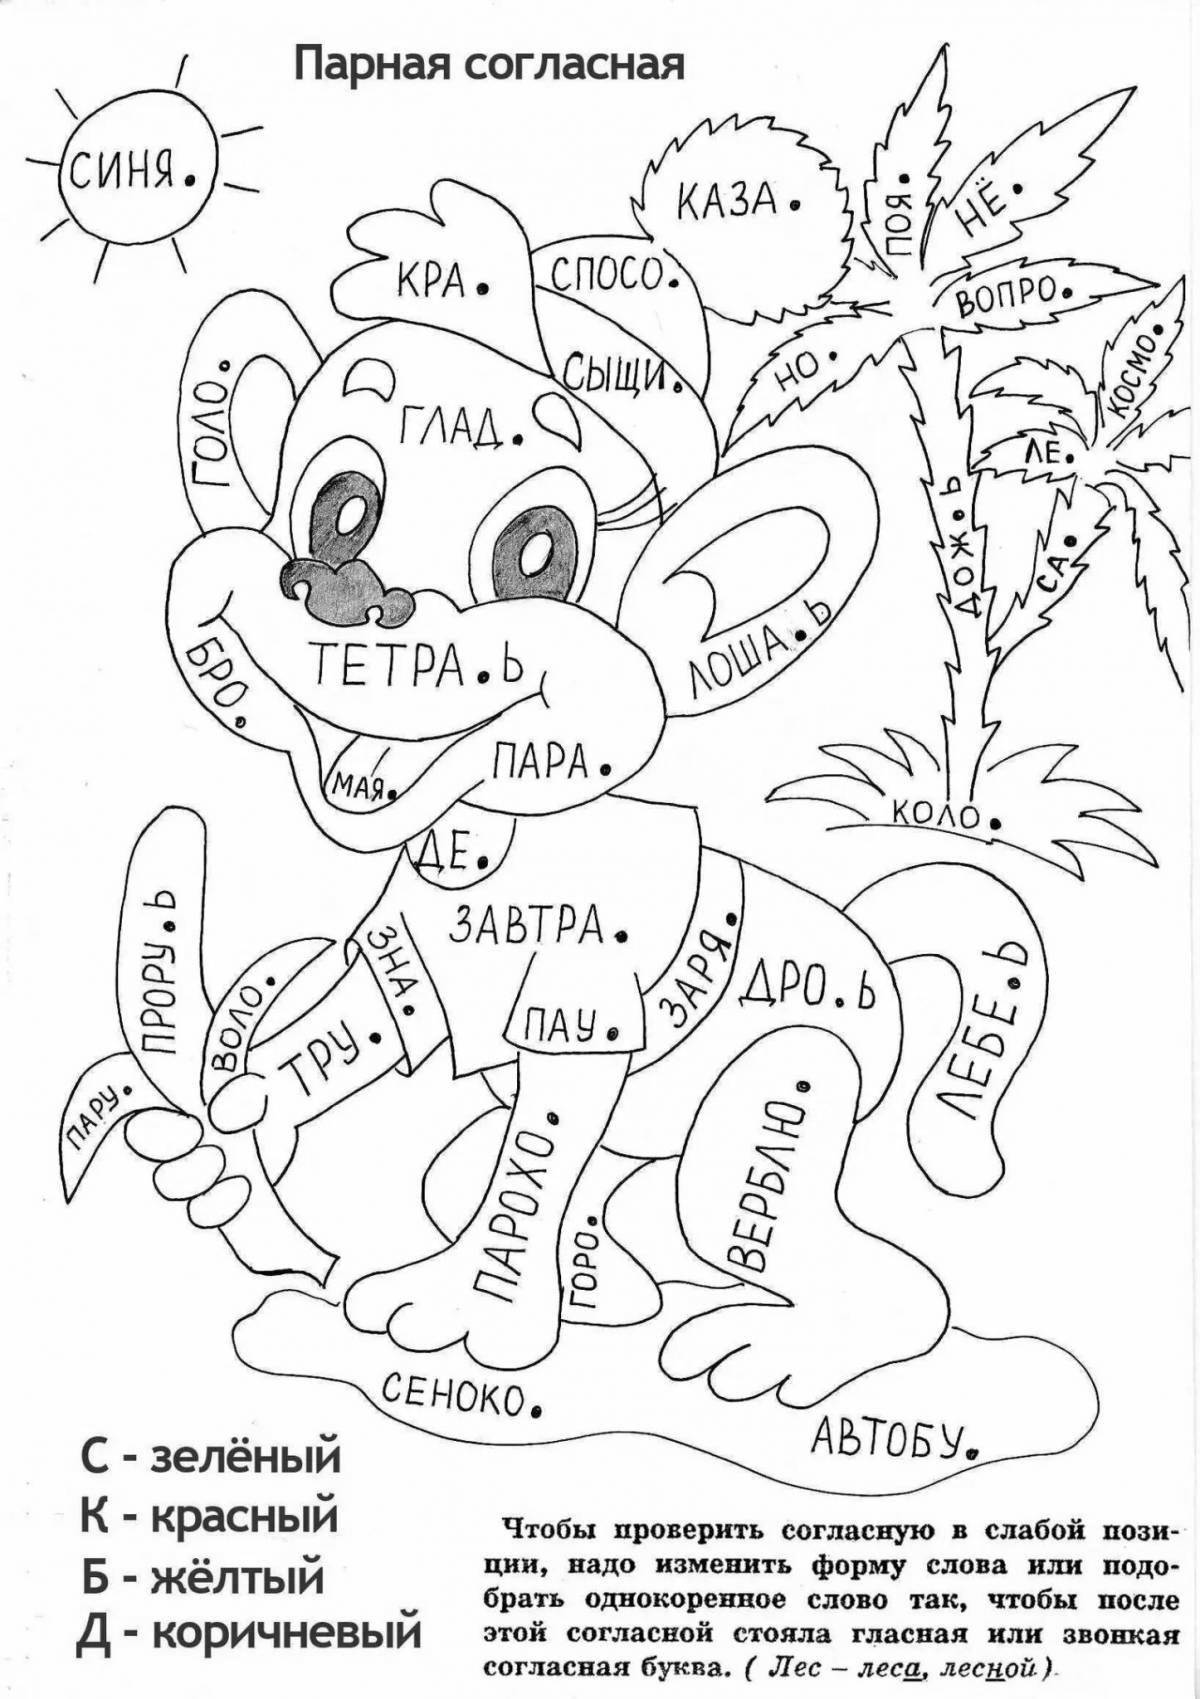 A fascinating spelling dictionary coloring book